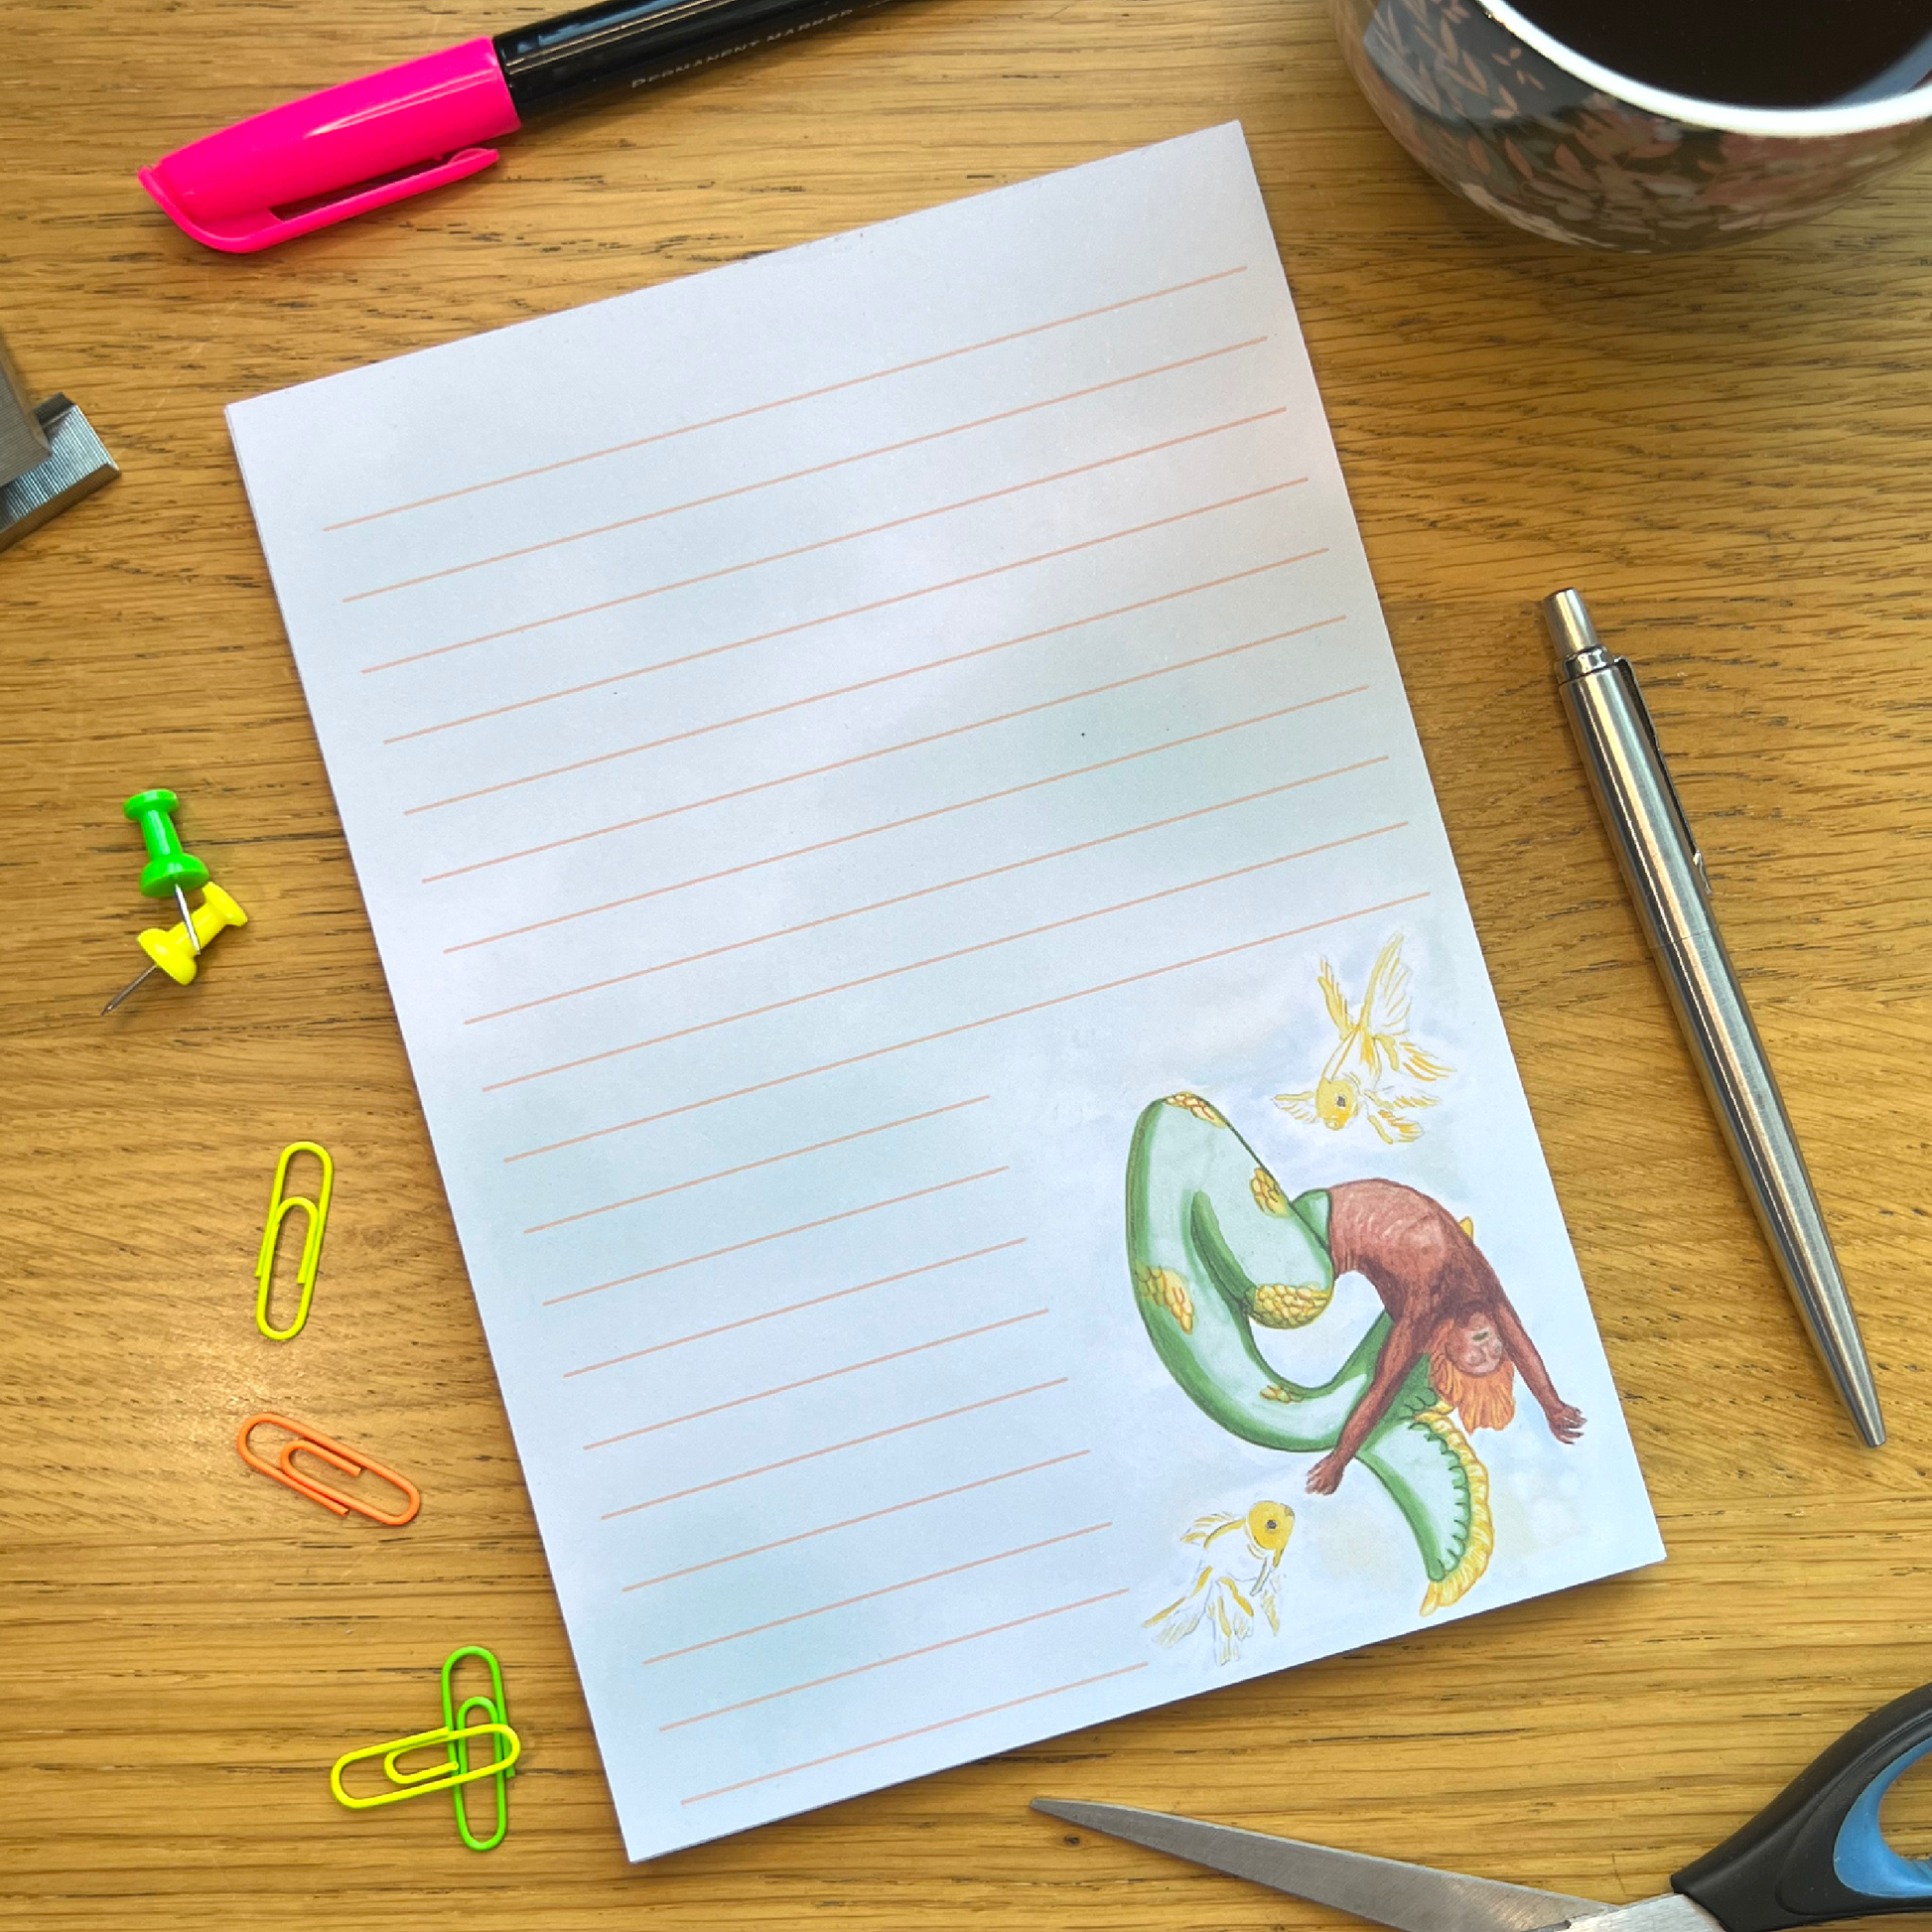 Citrus lined notepad sat in a wooden desk decorated and surrounded by pens and other stationery items. Notepad is washed with green and blue and features Citrus bottom right. Citrus mermaid dancing in a whirlwind shape bending backwards accompanied by two white and yellow goldfiish. Citrus has orange toned skin and a green tail with patches of yellow scales.